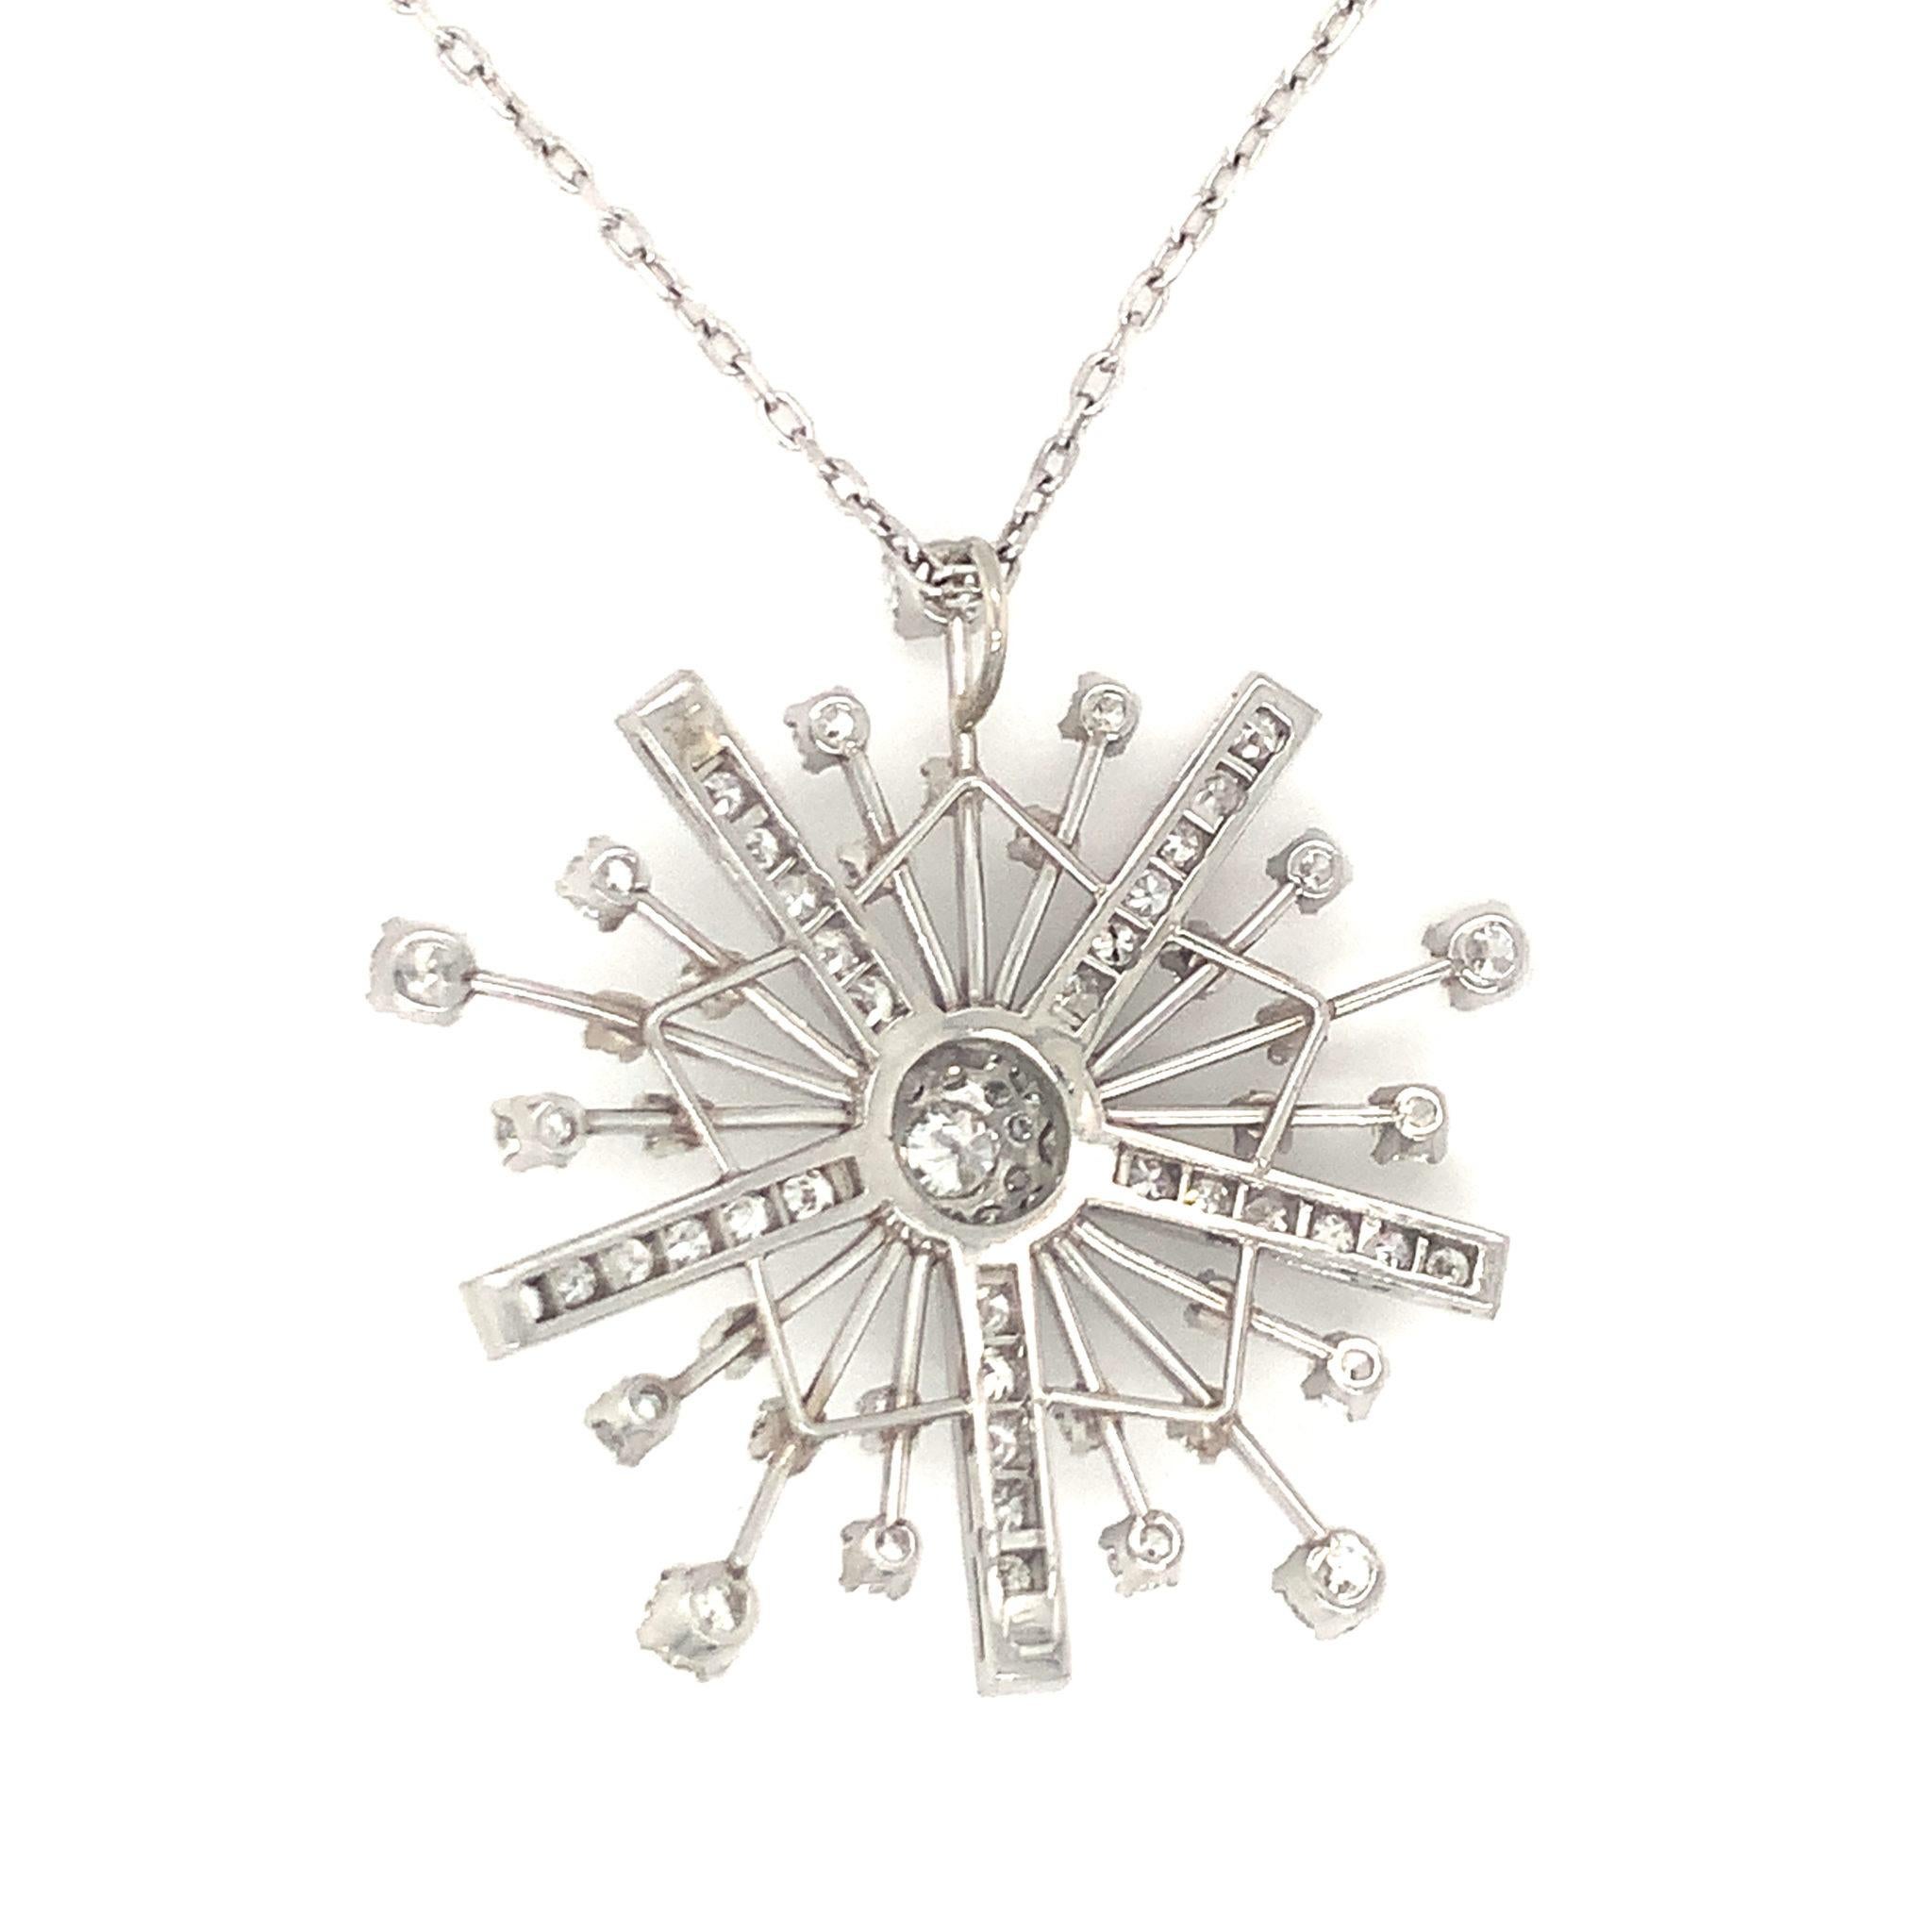 One mid-century diamond snowflake motif platinum pendant featuring 81 old European cut and single round cut diamonds totaling 2.55 ct. Measuring 38 millimeters in diameter, and set upon a platinum open link chain necklace. Circa 1950s.

Dazzling,